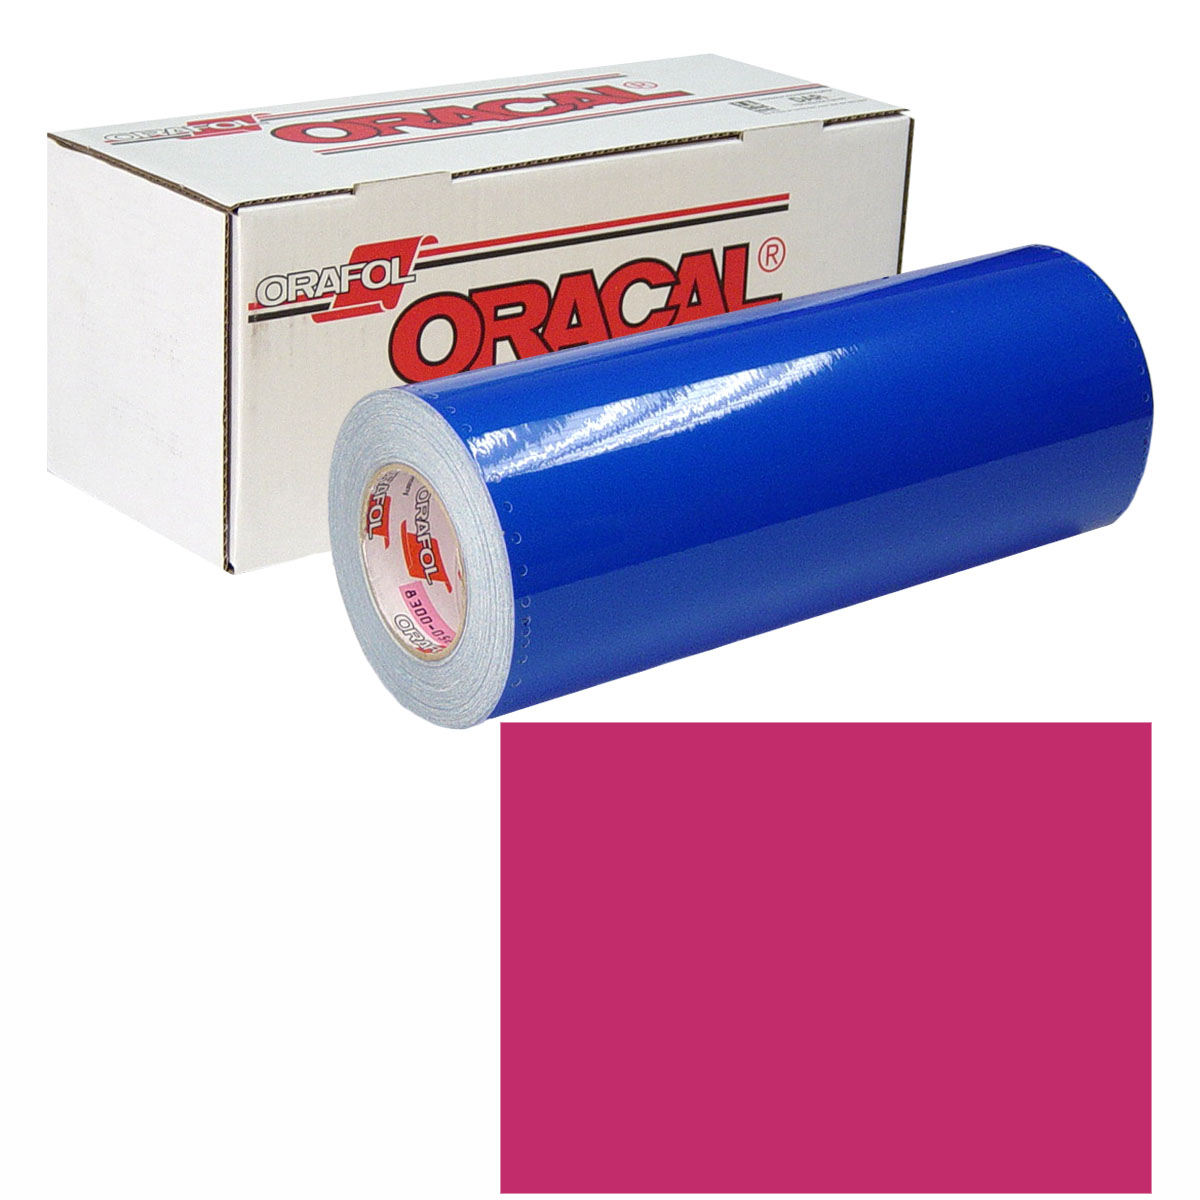 ORACAL 631 15in X 10yd 041 Pink